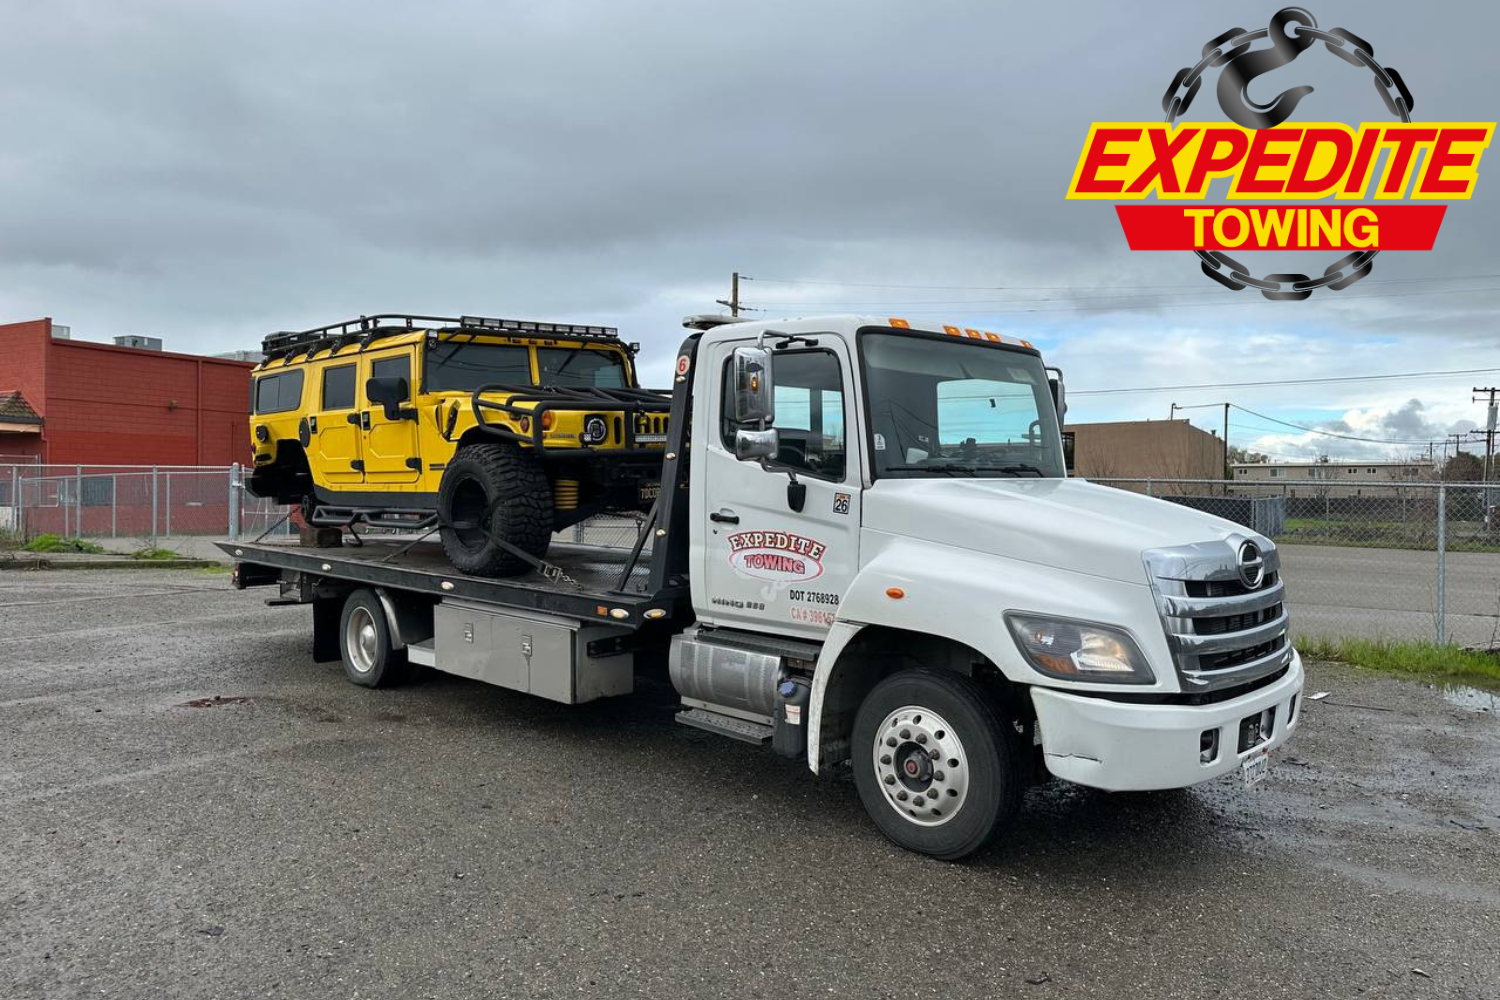 Expedite Towing Launches Long Distance Towing Services in San Diego at Highly Competitive Prices